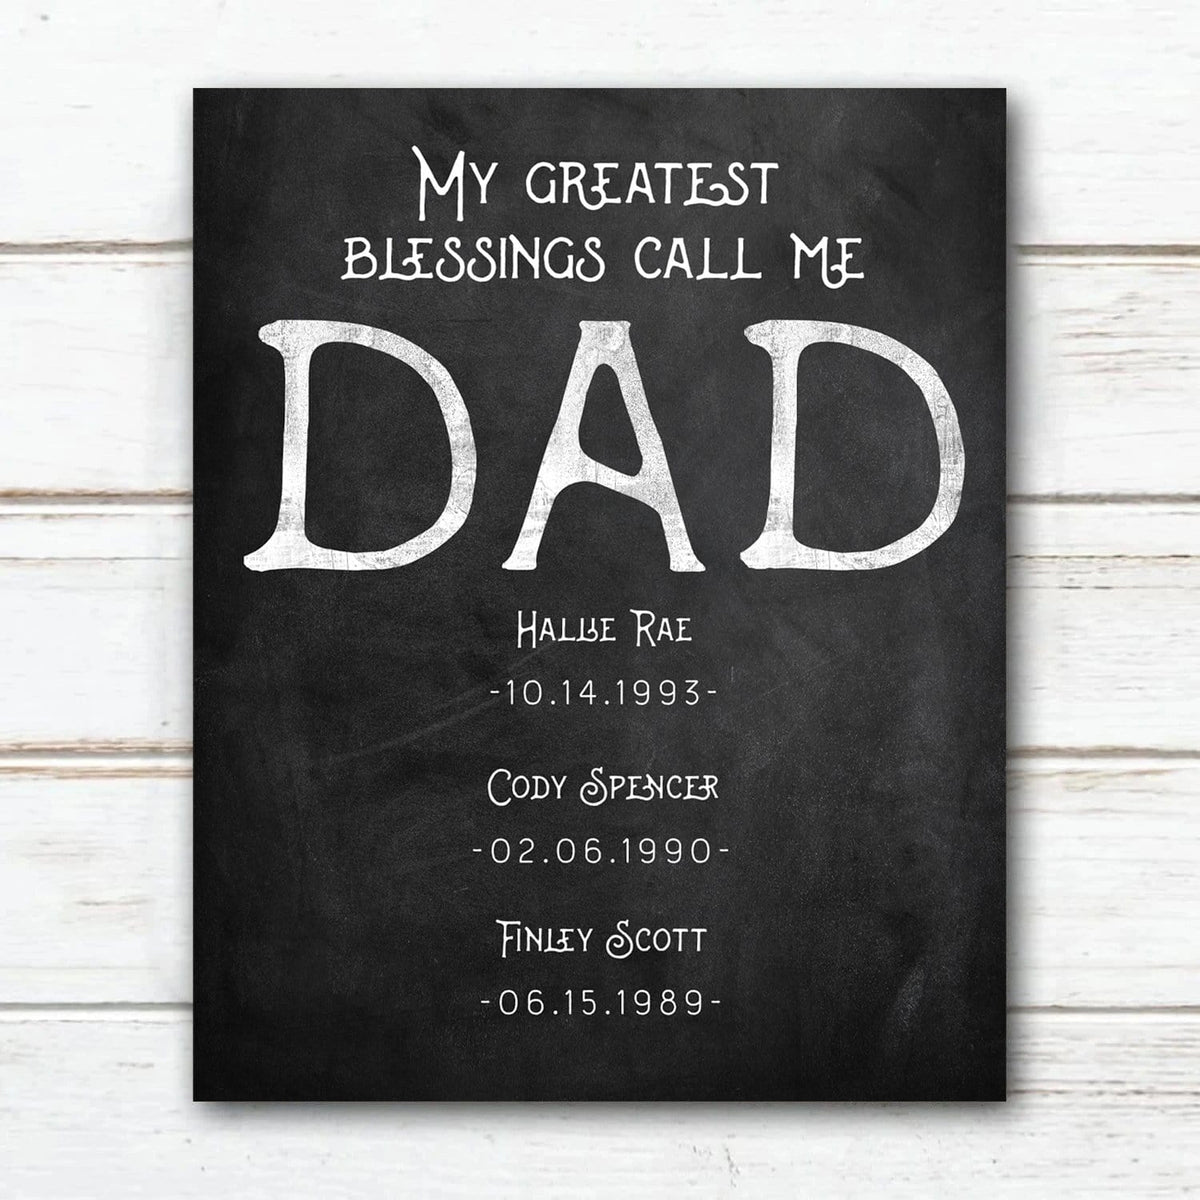 My Greatest Blessings Call Me Dad - Personalized gift for Father&#39;s Day